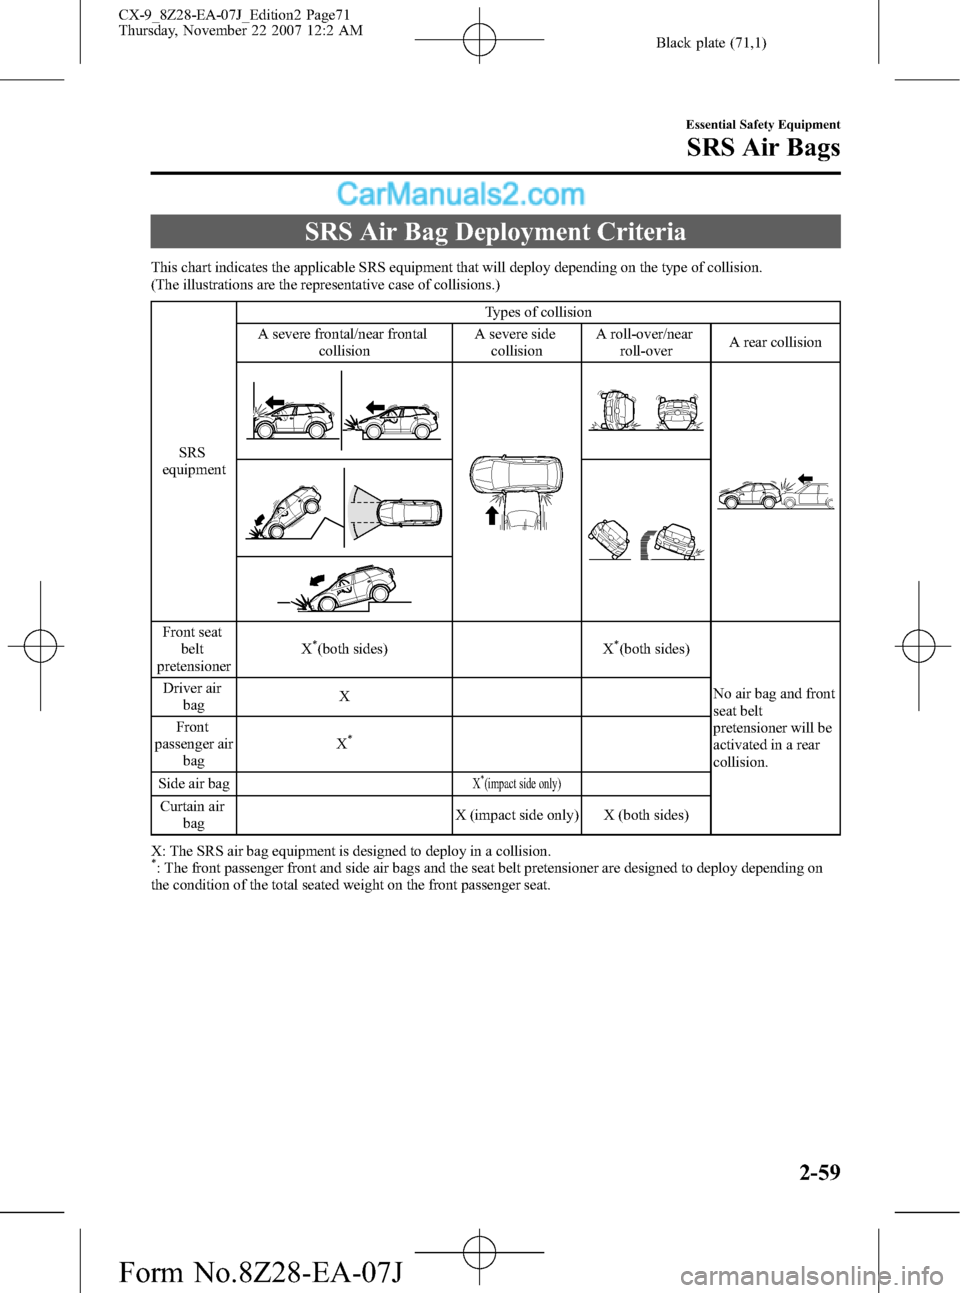 MAZDA MODEL CX-9 2008  Owners Manual (in English) Black plate (71,1)
SRS Air Bag Deployment Criteria
This chart indicates the applicable SRS equipment that will deploy depending on the type of collision.
(The illustrations are the representative case